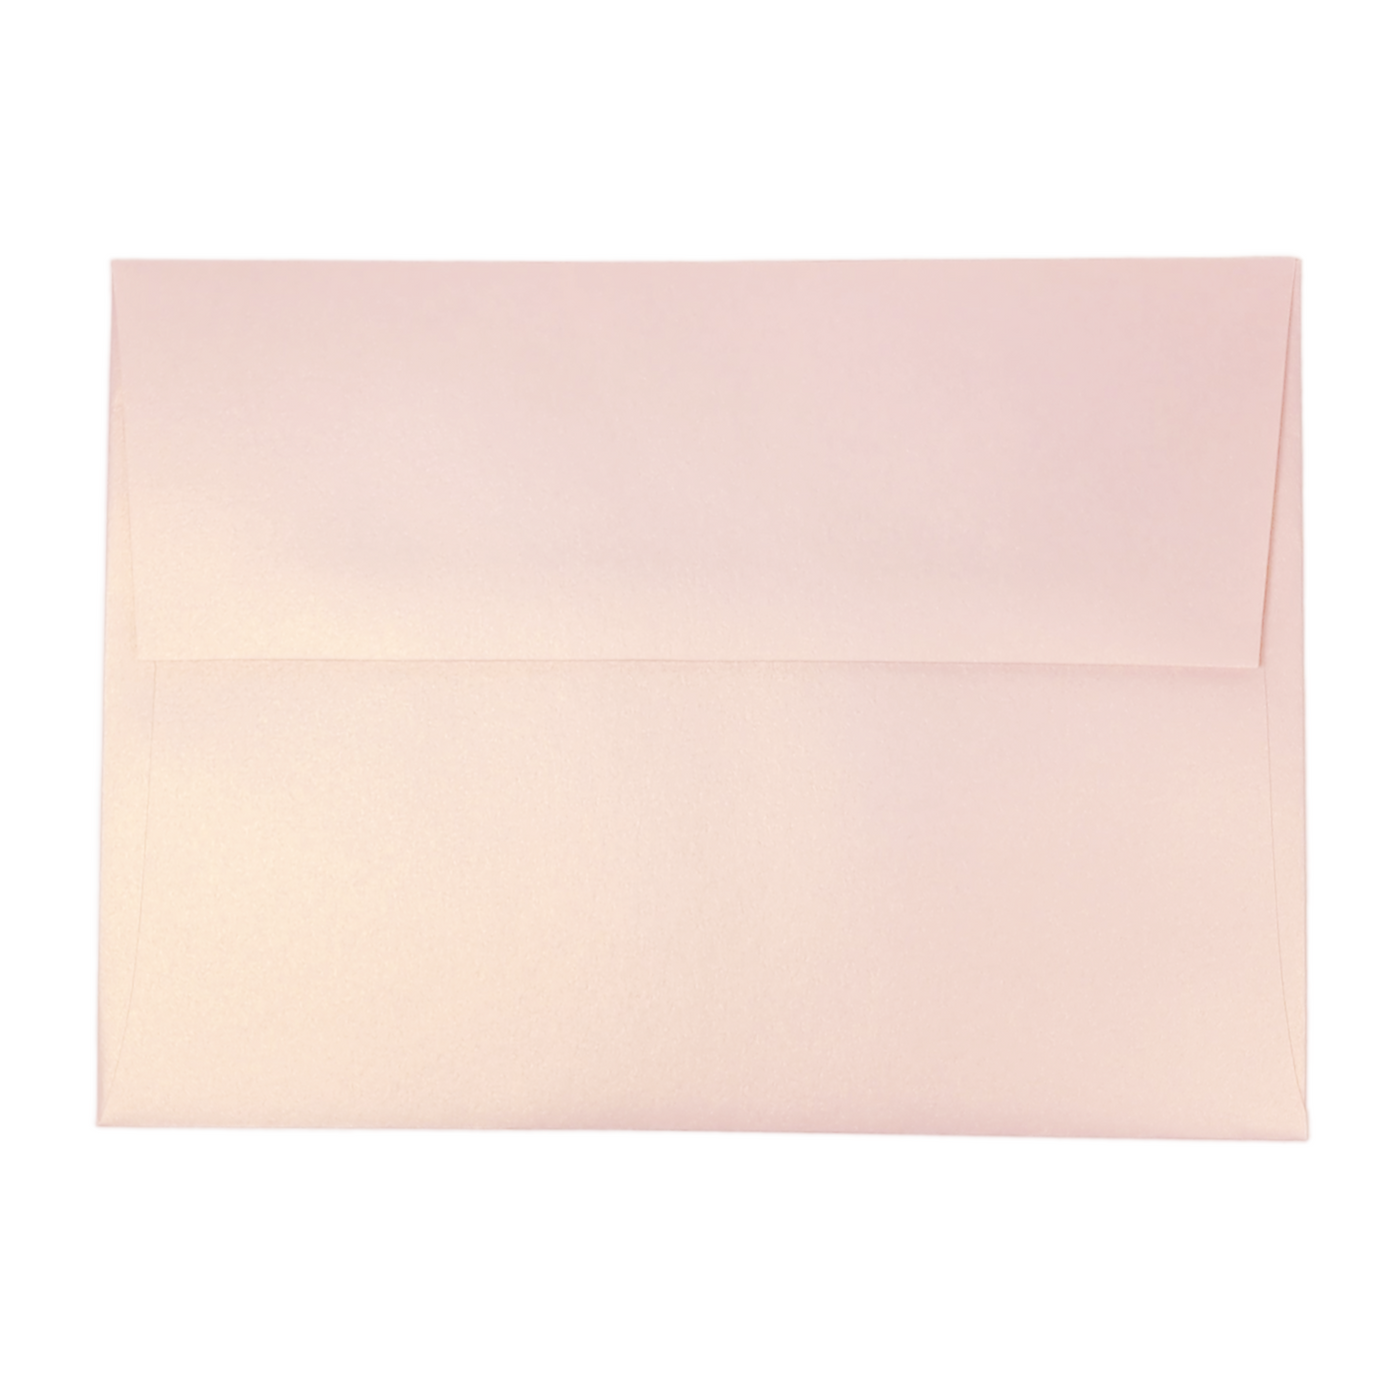 Blush pink metallic envelope with pearlescent finish that instantly elevates your handmade invitations. Pearlescent pink envelopes for wedding invitations and more.